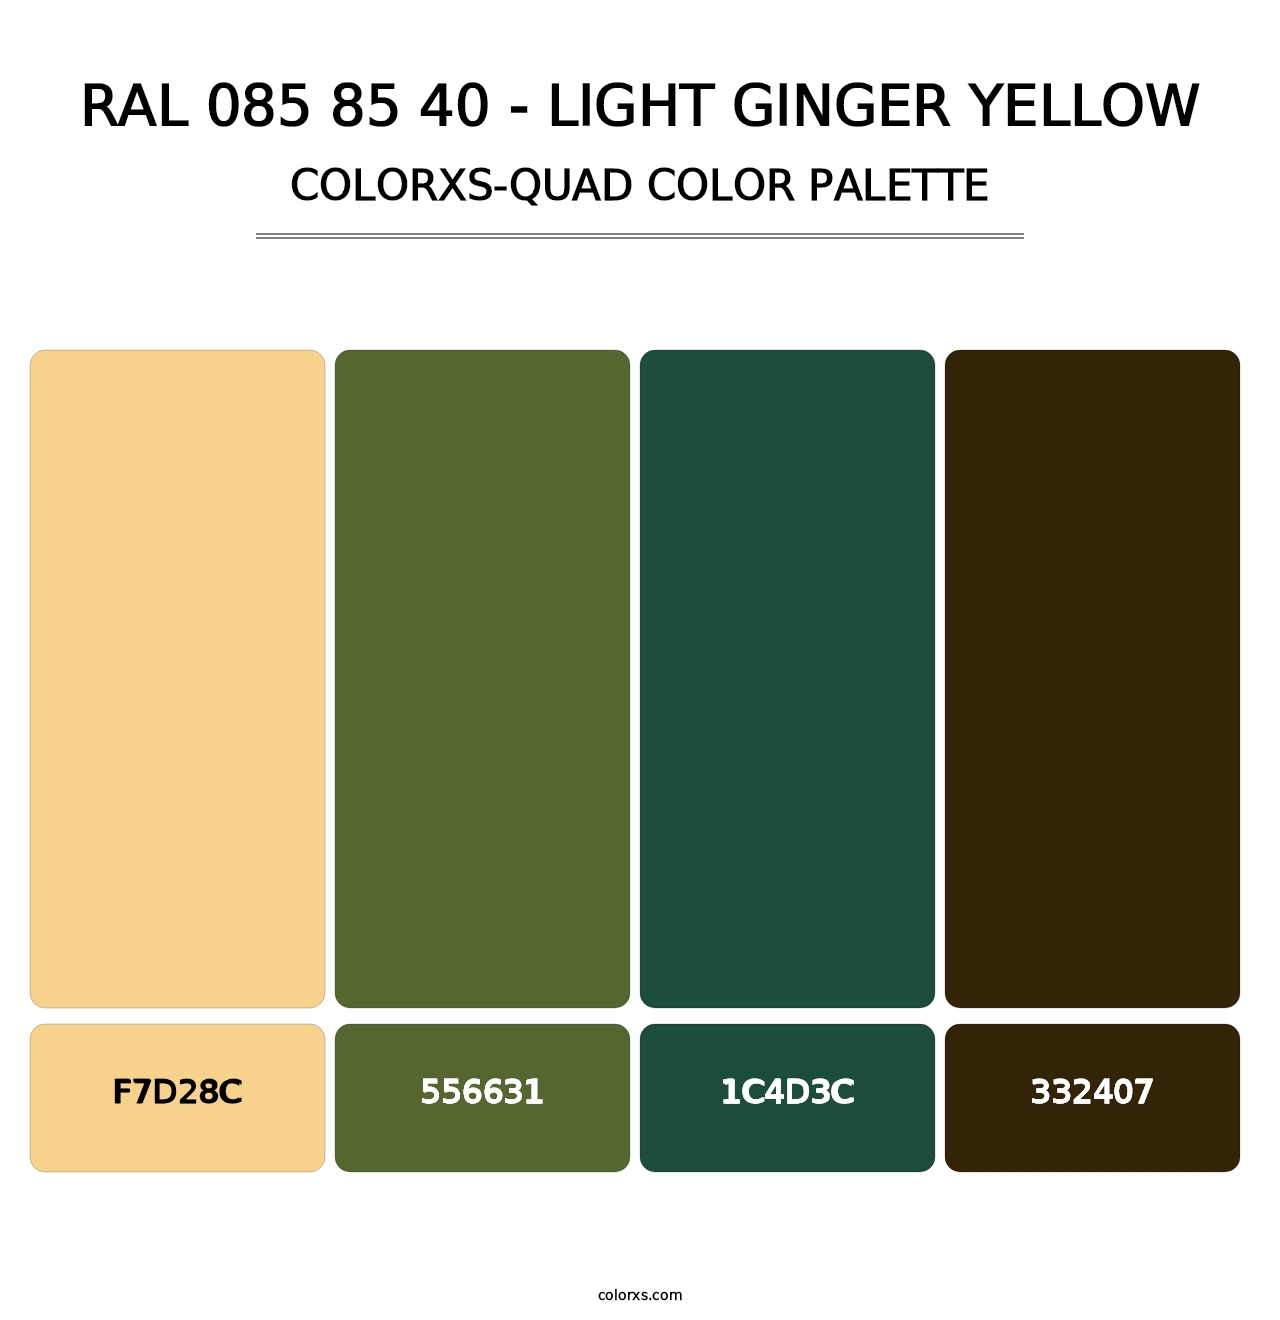 RAL 085 85 40 - Light Ginger Yellow - Colorxs Quad Palette